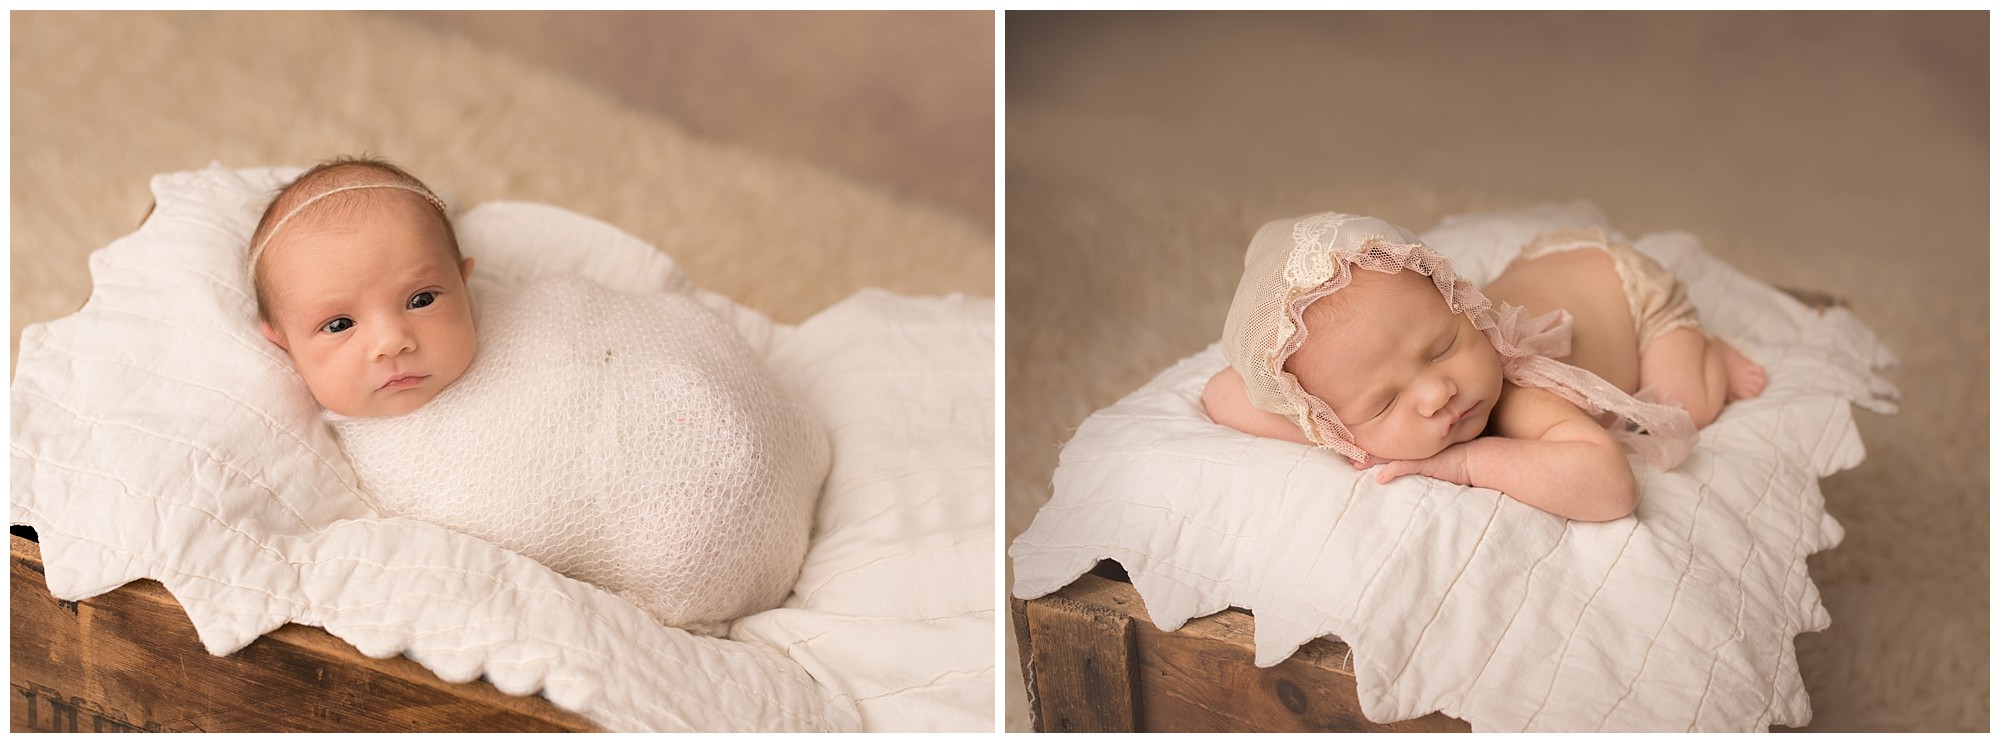 picture of a sleeping baby girl wrapped in cream blankets